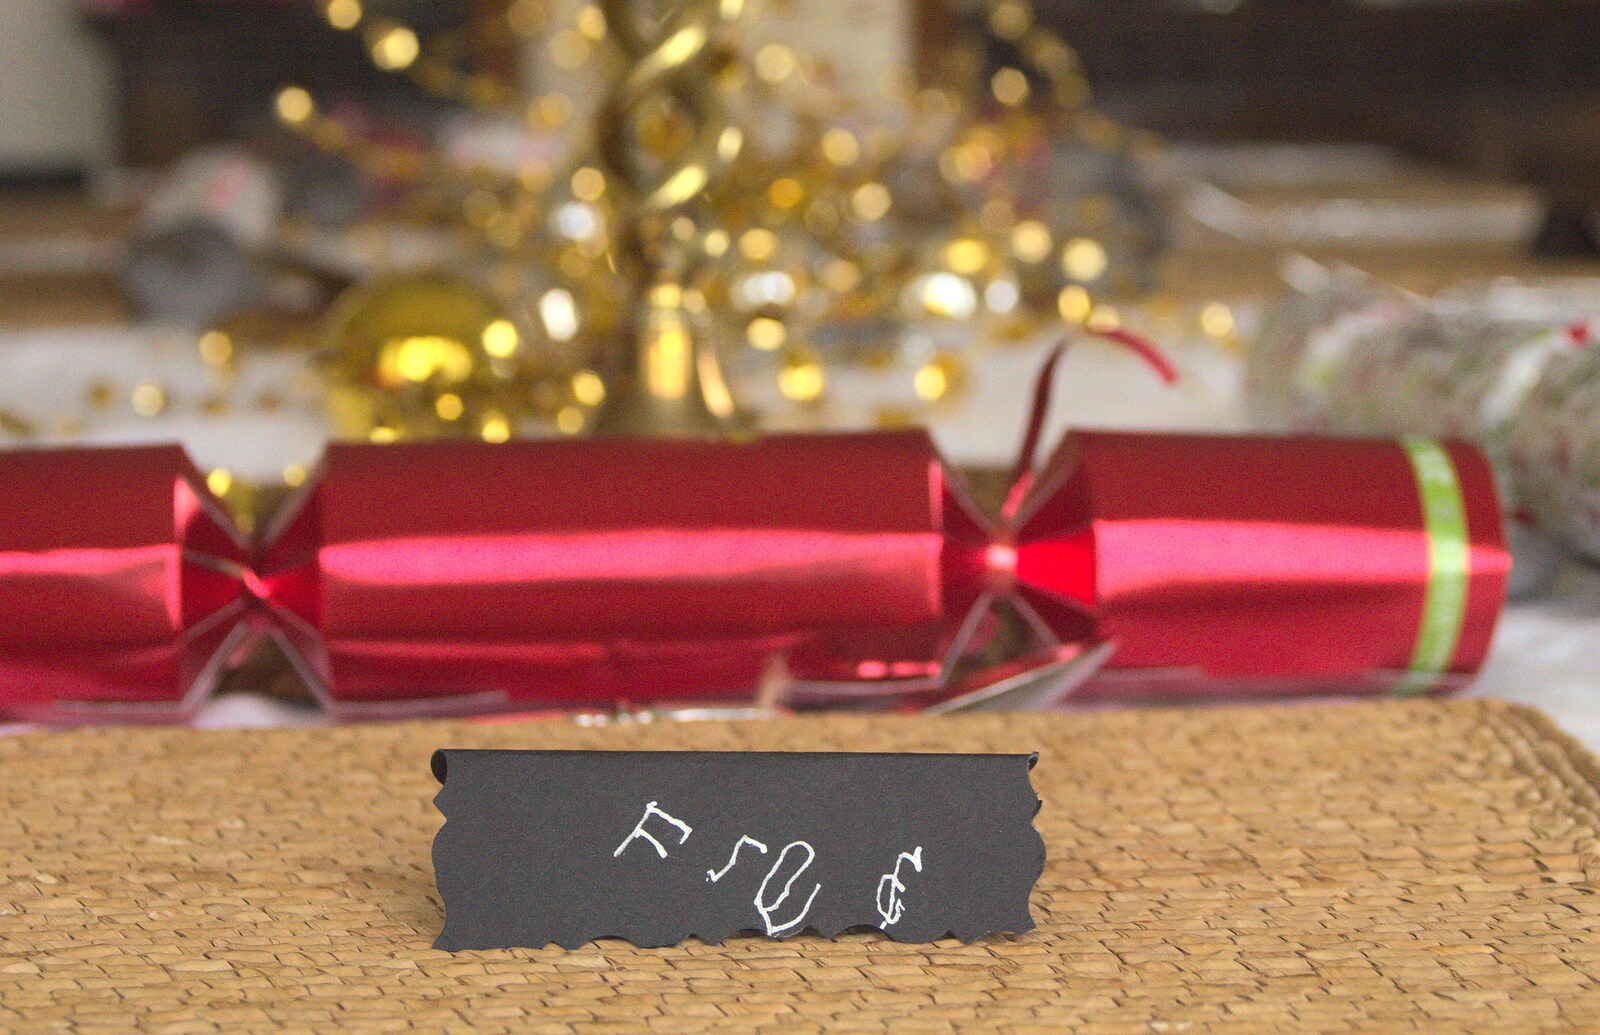 Fred's written up his own name tag from Christmas Day in Spreyton, Devon - 25th December 2012